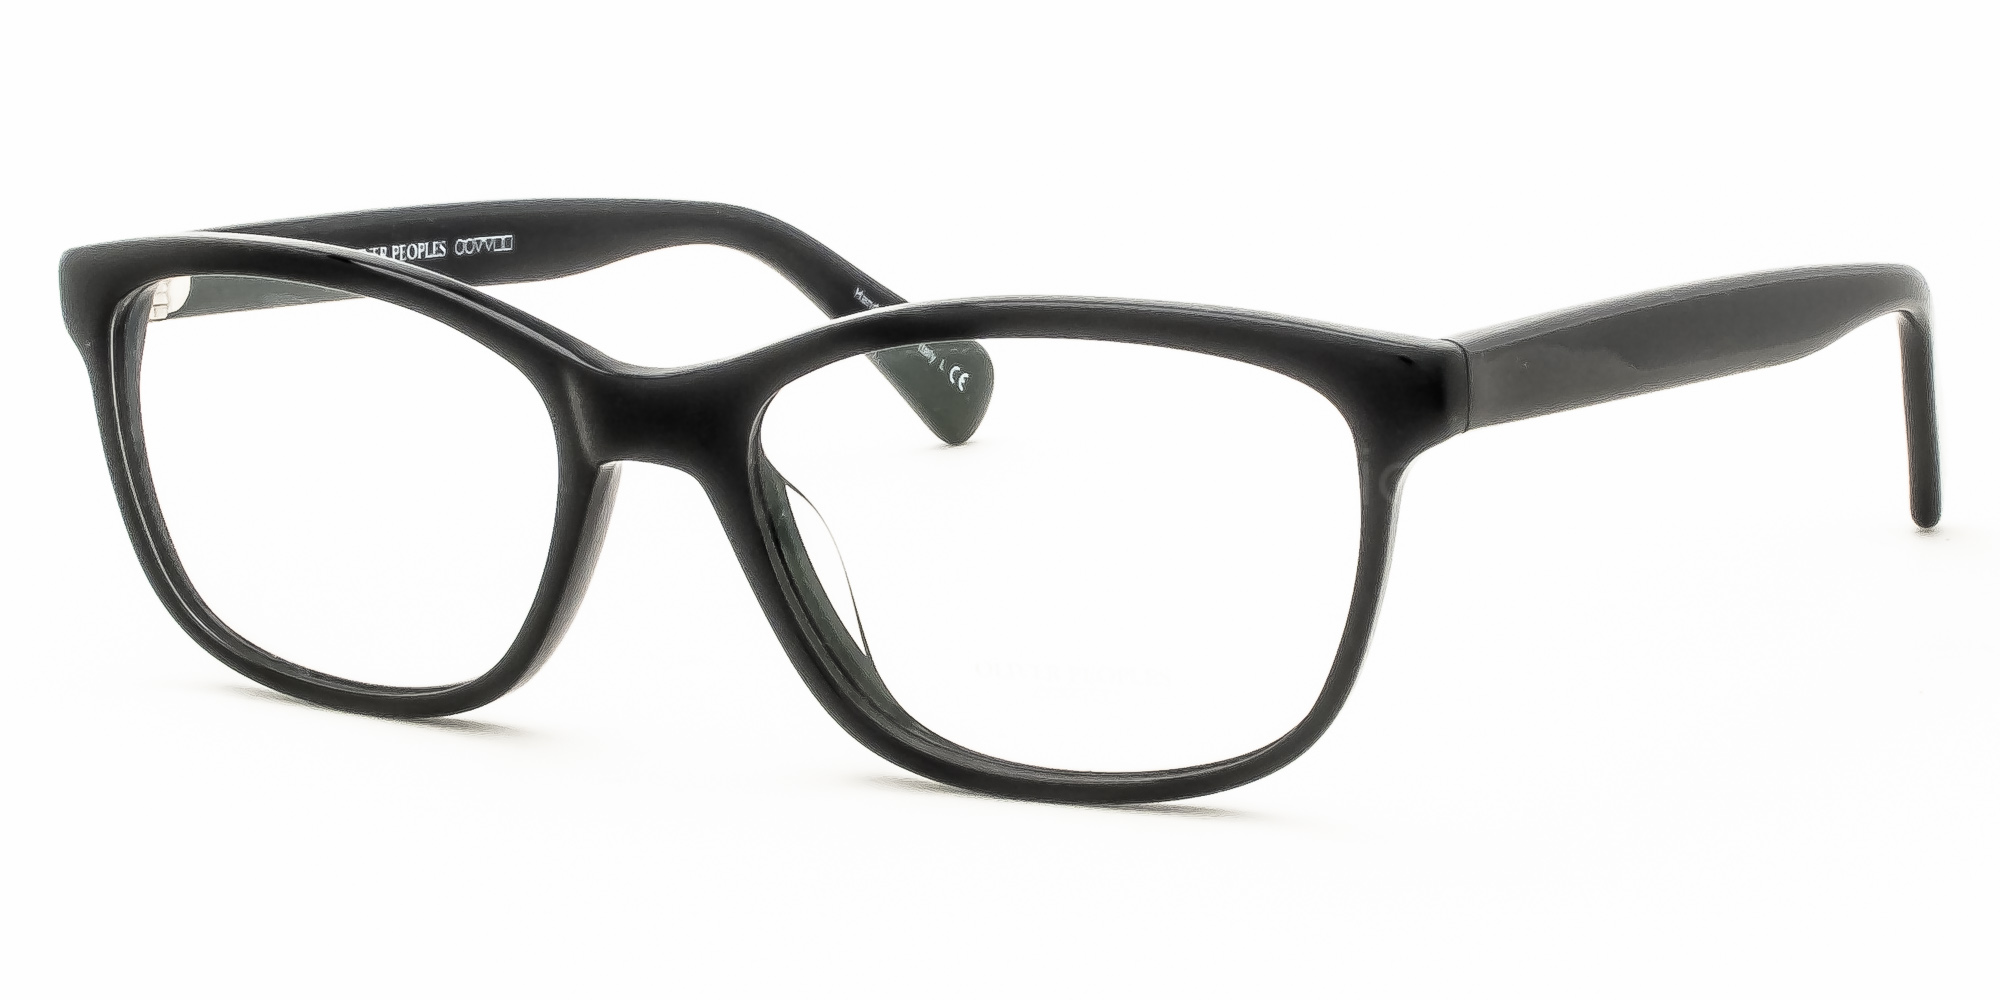 OLIVER PEOPLES FOLLIES 1005